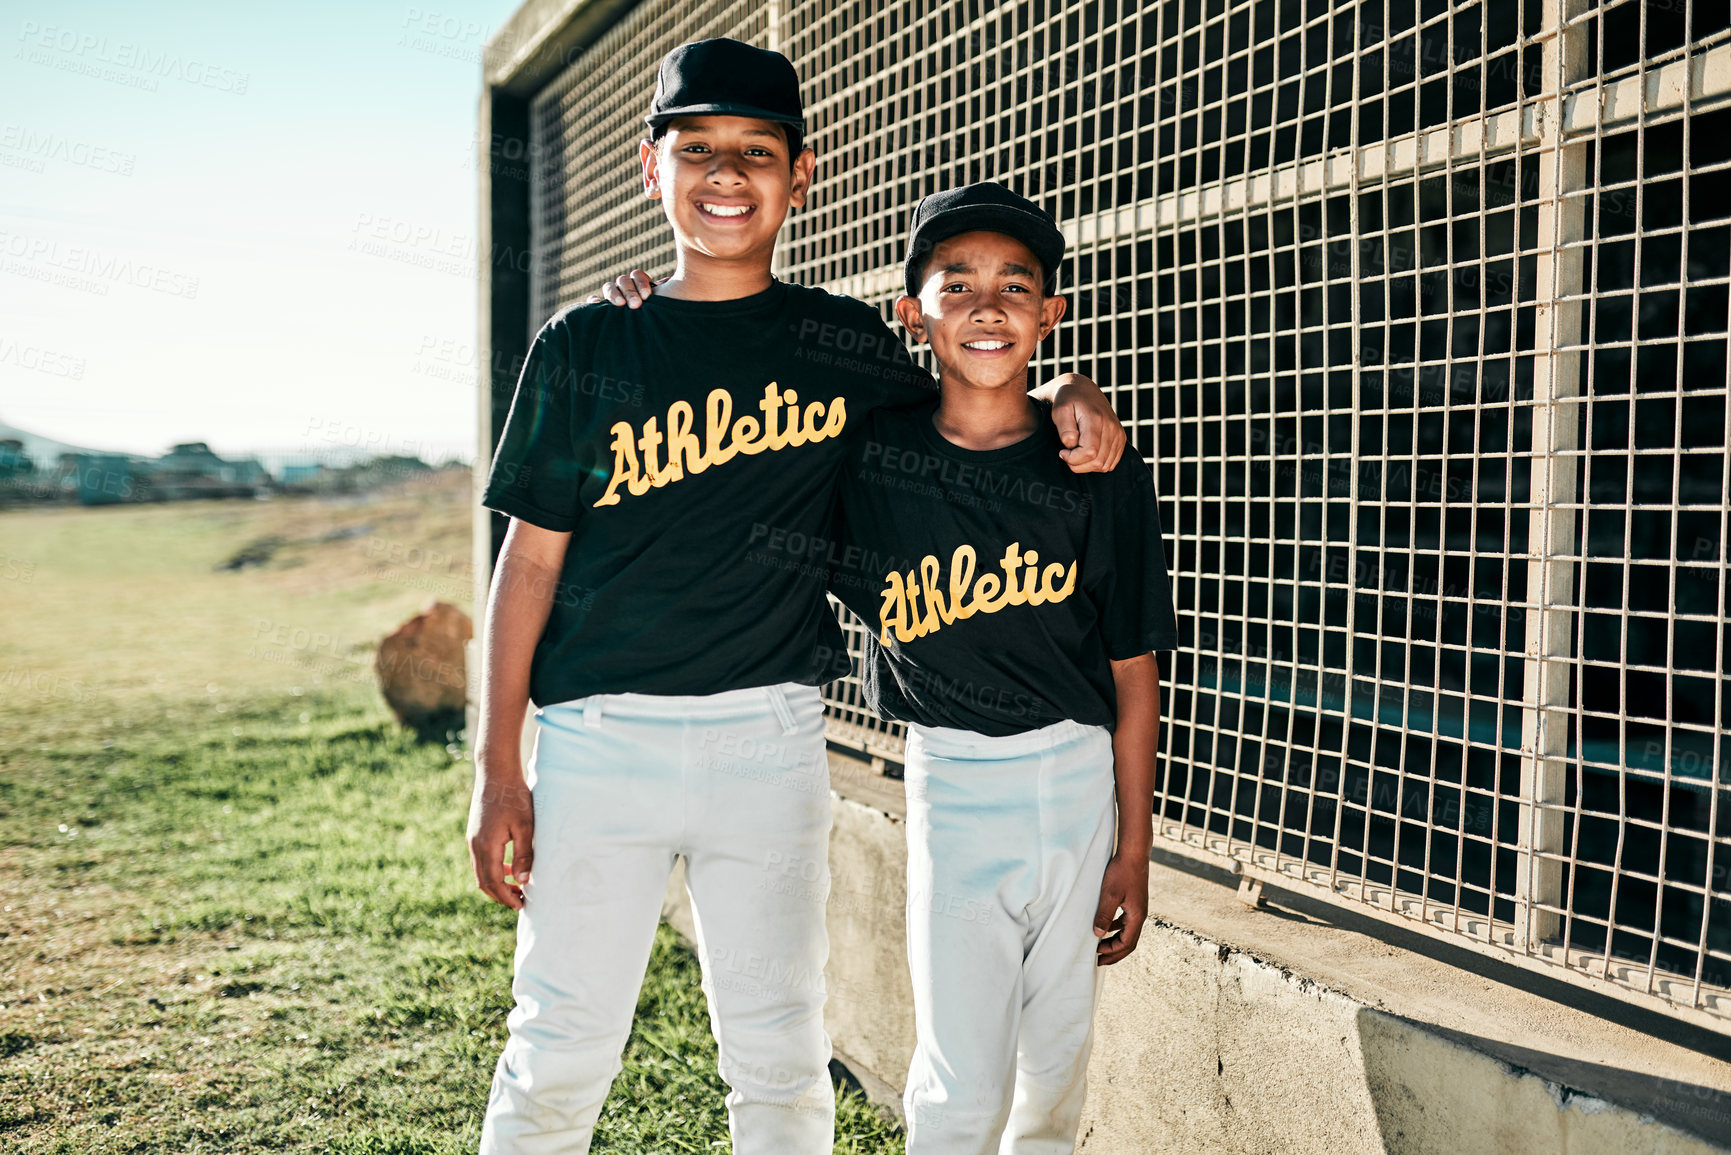 Buy stock photo Portrait of two young baseball players standing together on the pitch